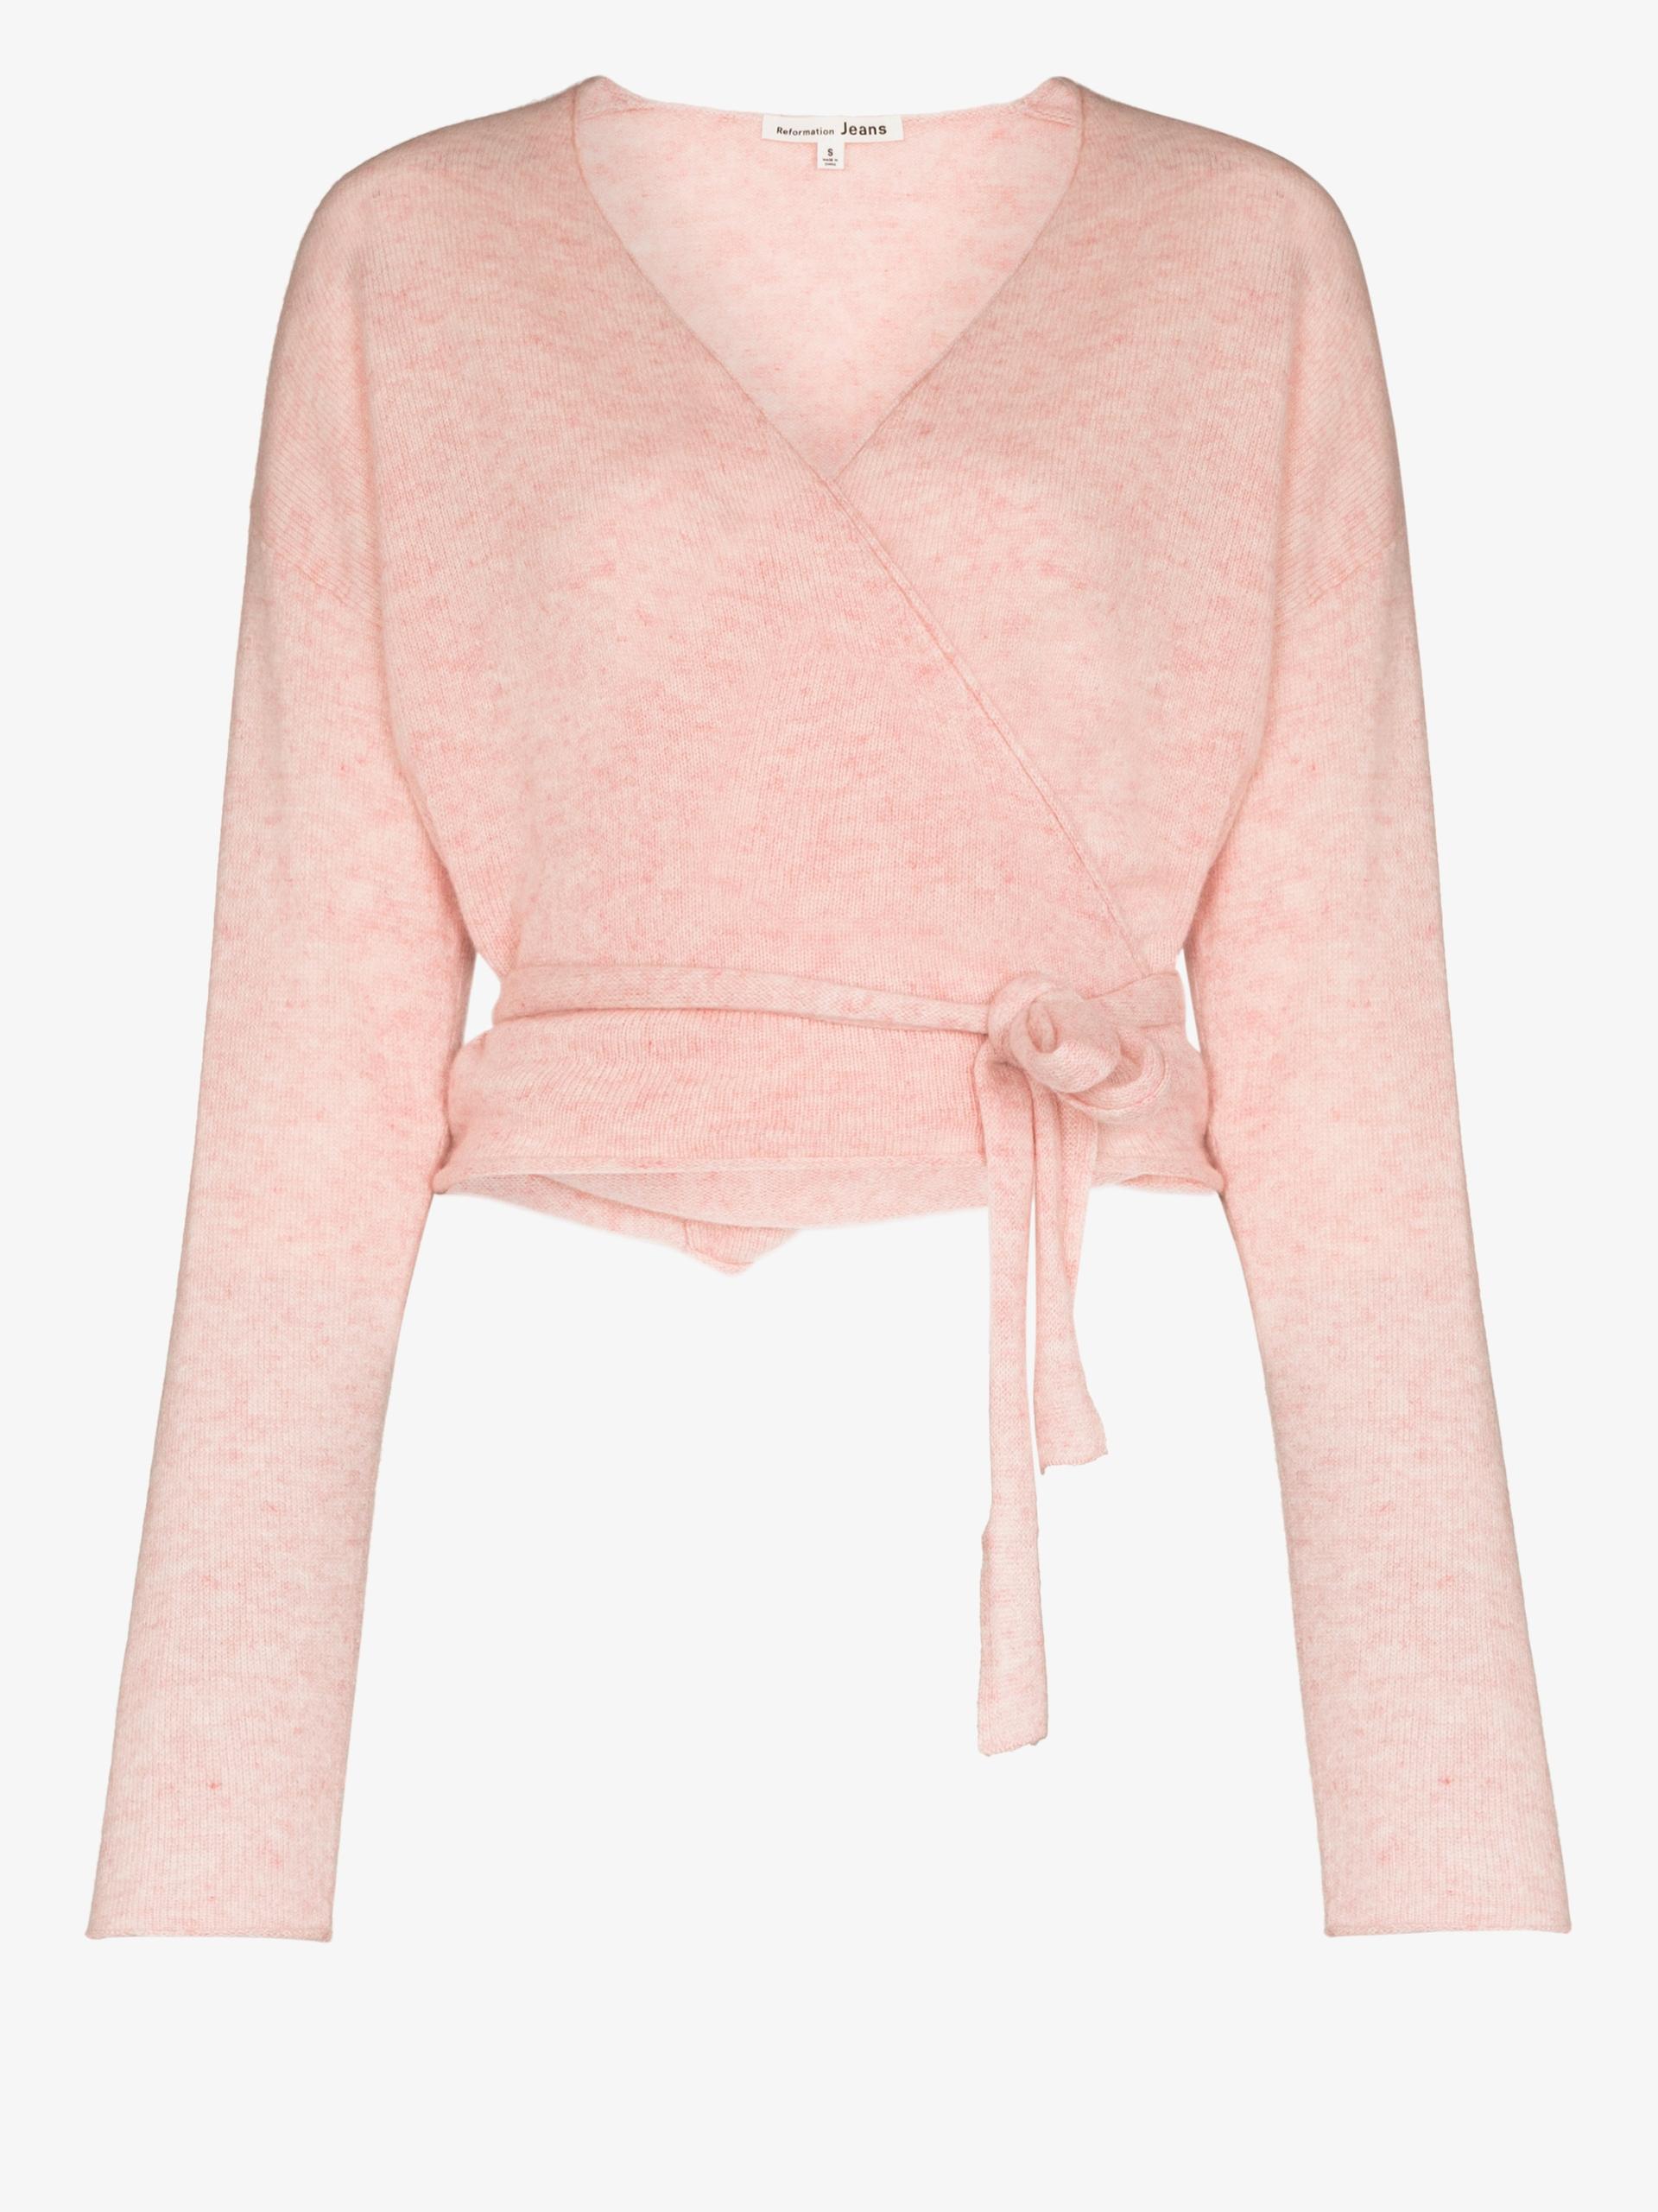 Reformation Cashmere Wrap Cardigan in Pink | Lyst